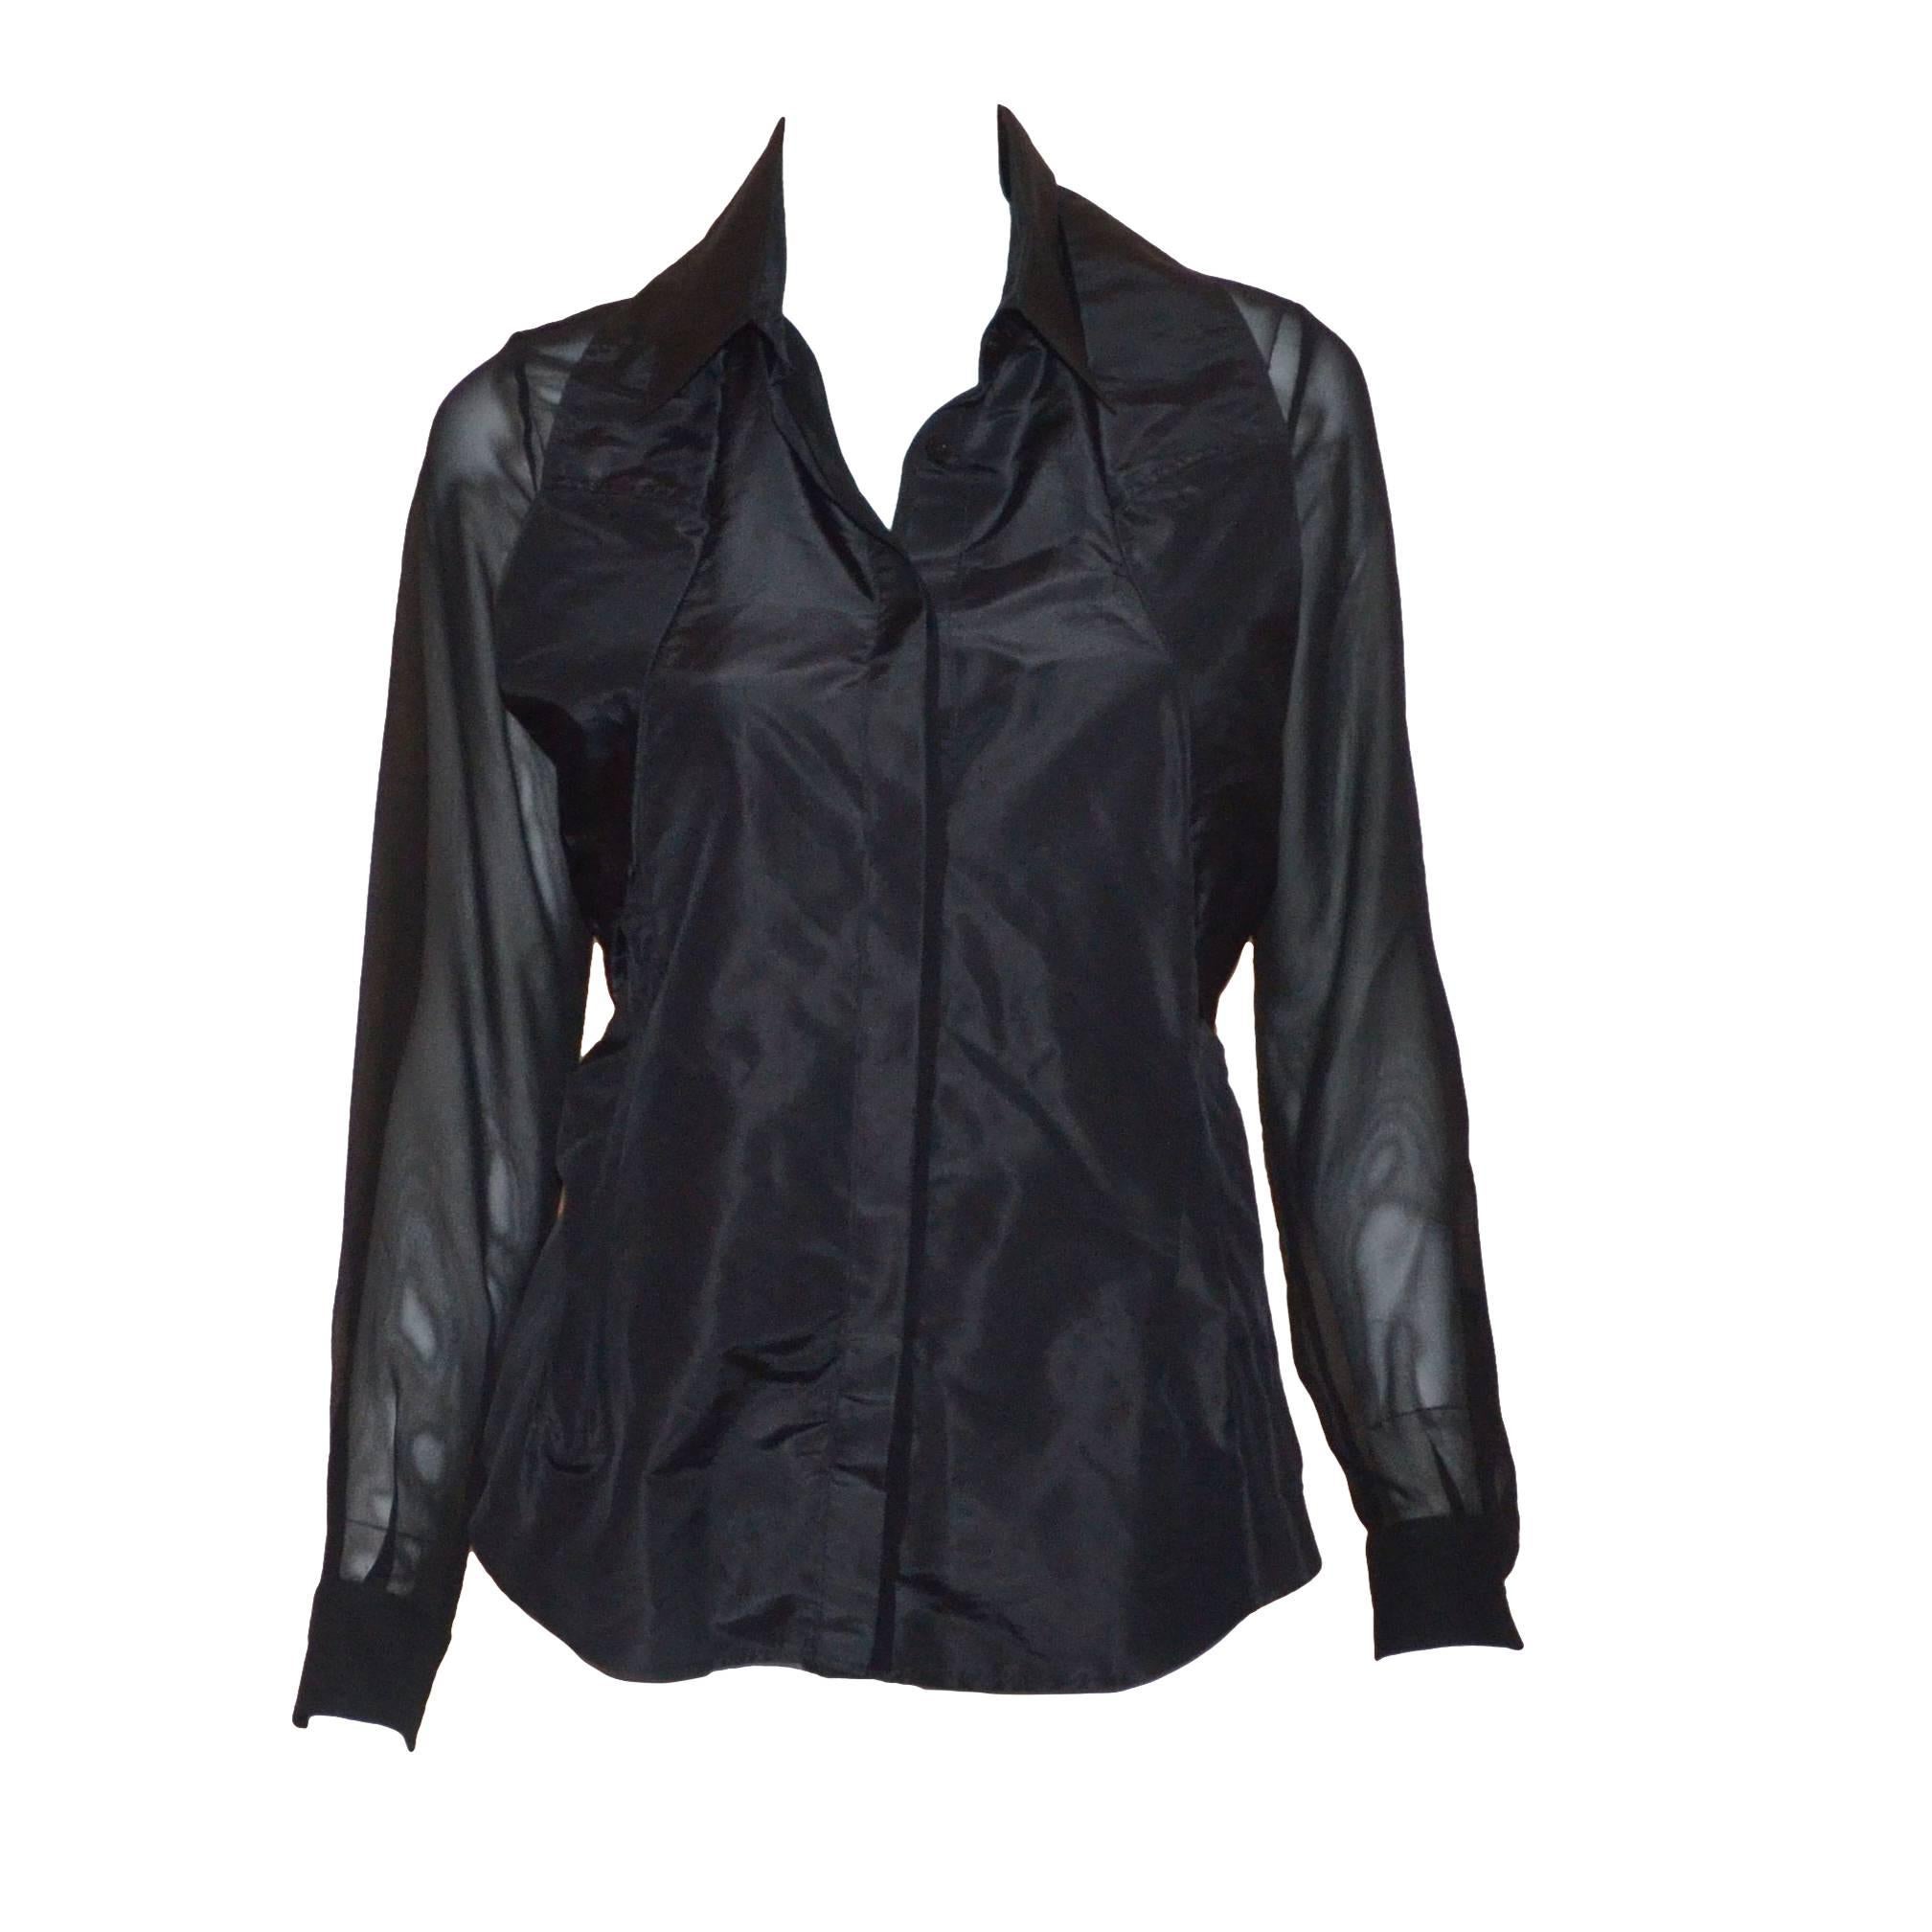 Moschino Silk Chiffon Blouse with Sleeves That Tie at the Waist